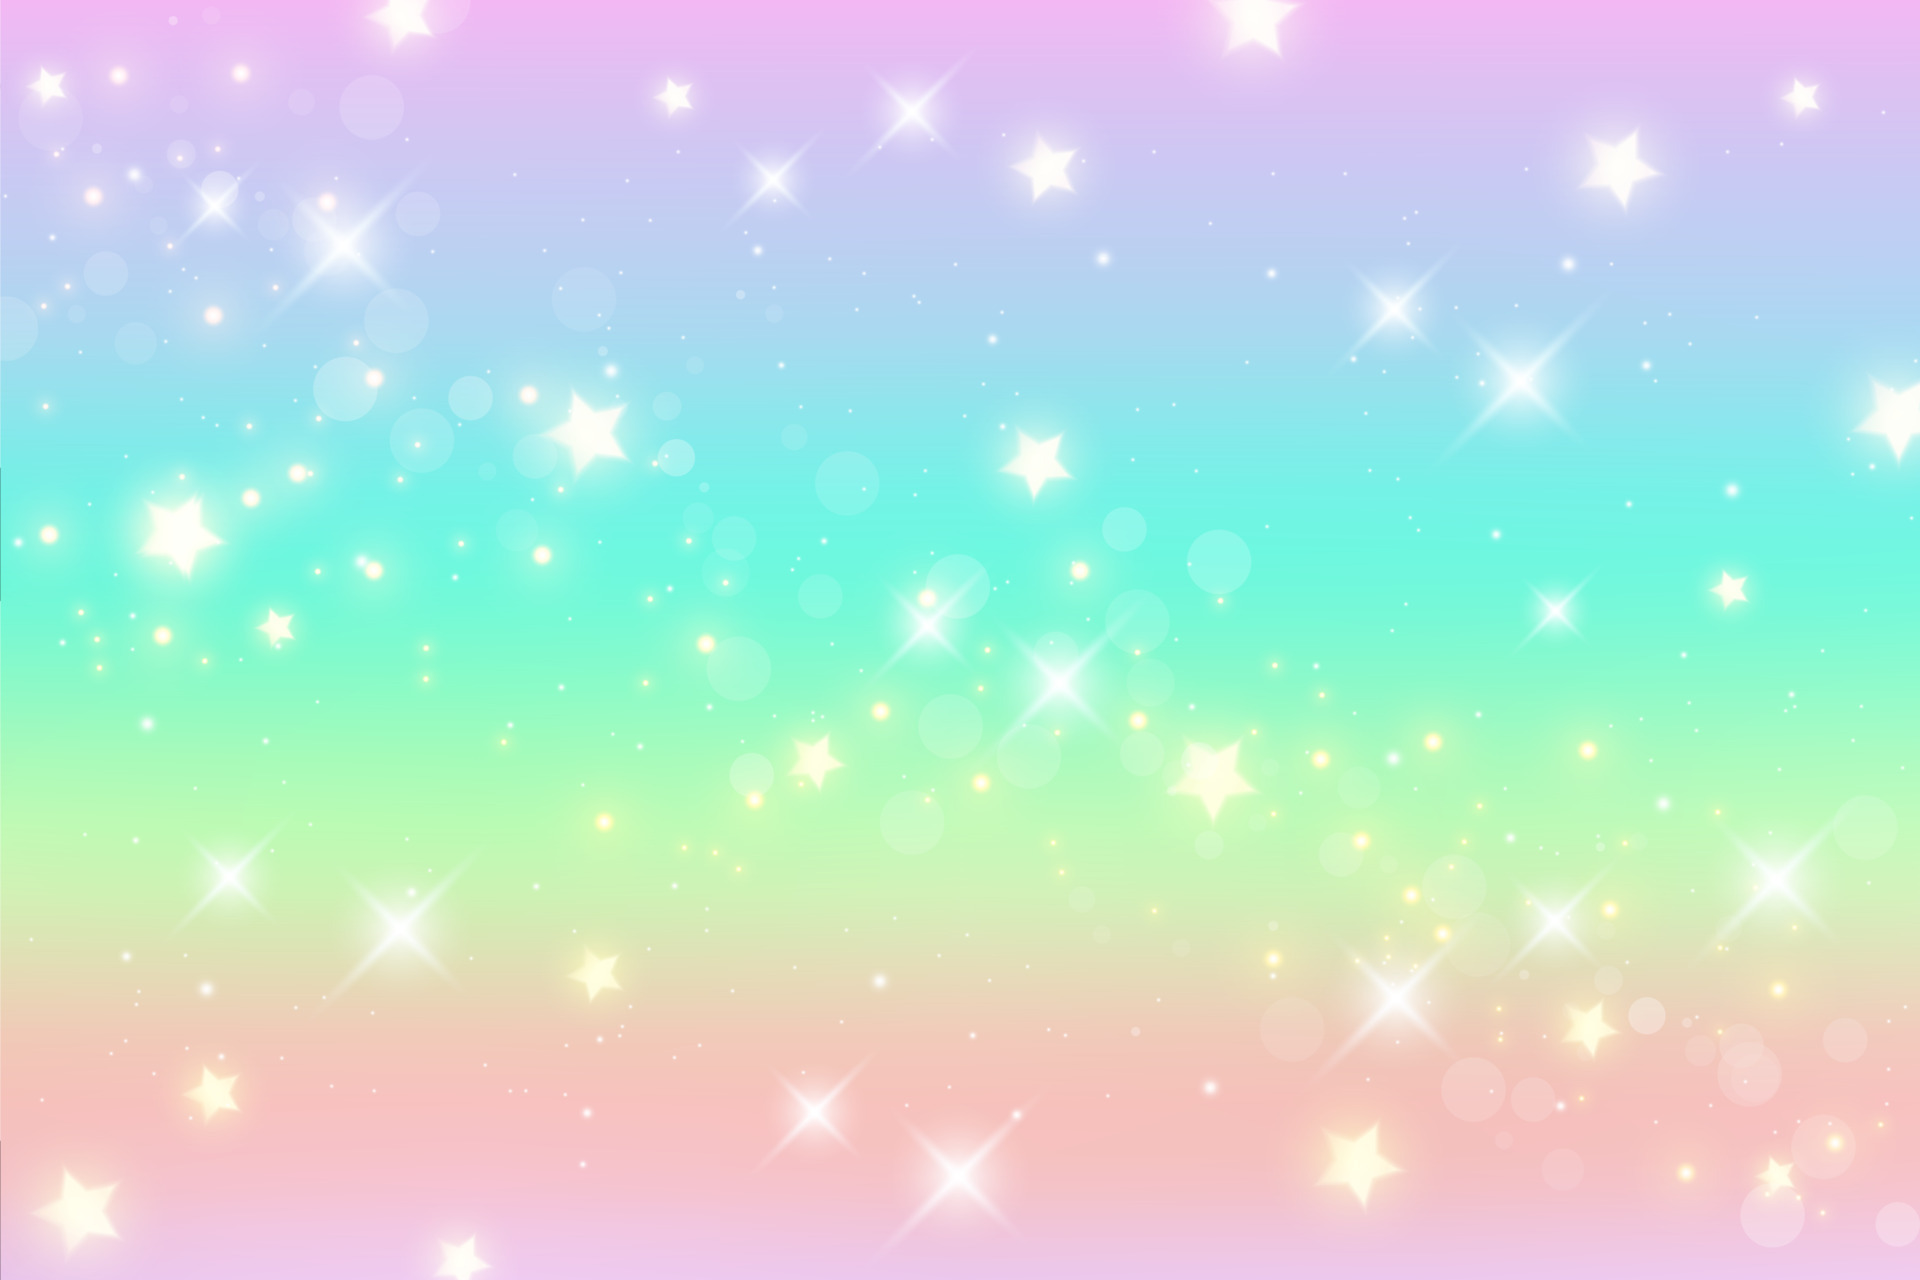 Rainbow fantasy background. Holographic illustration in pastel colors ...